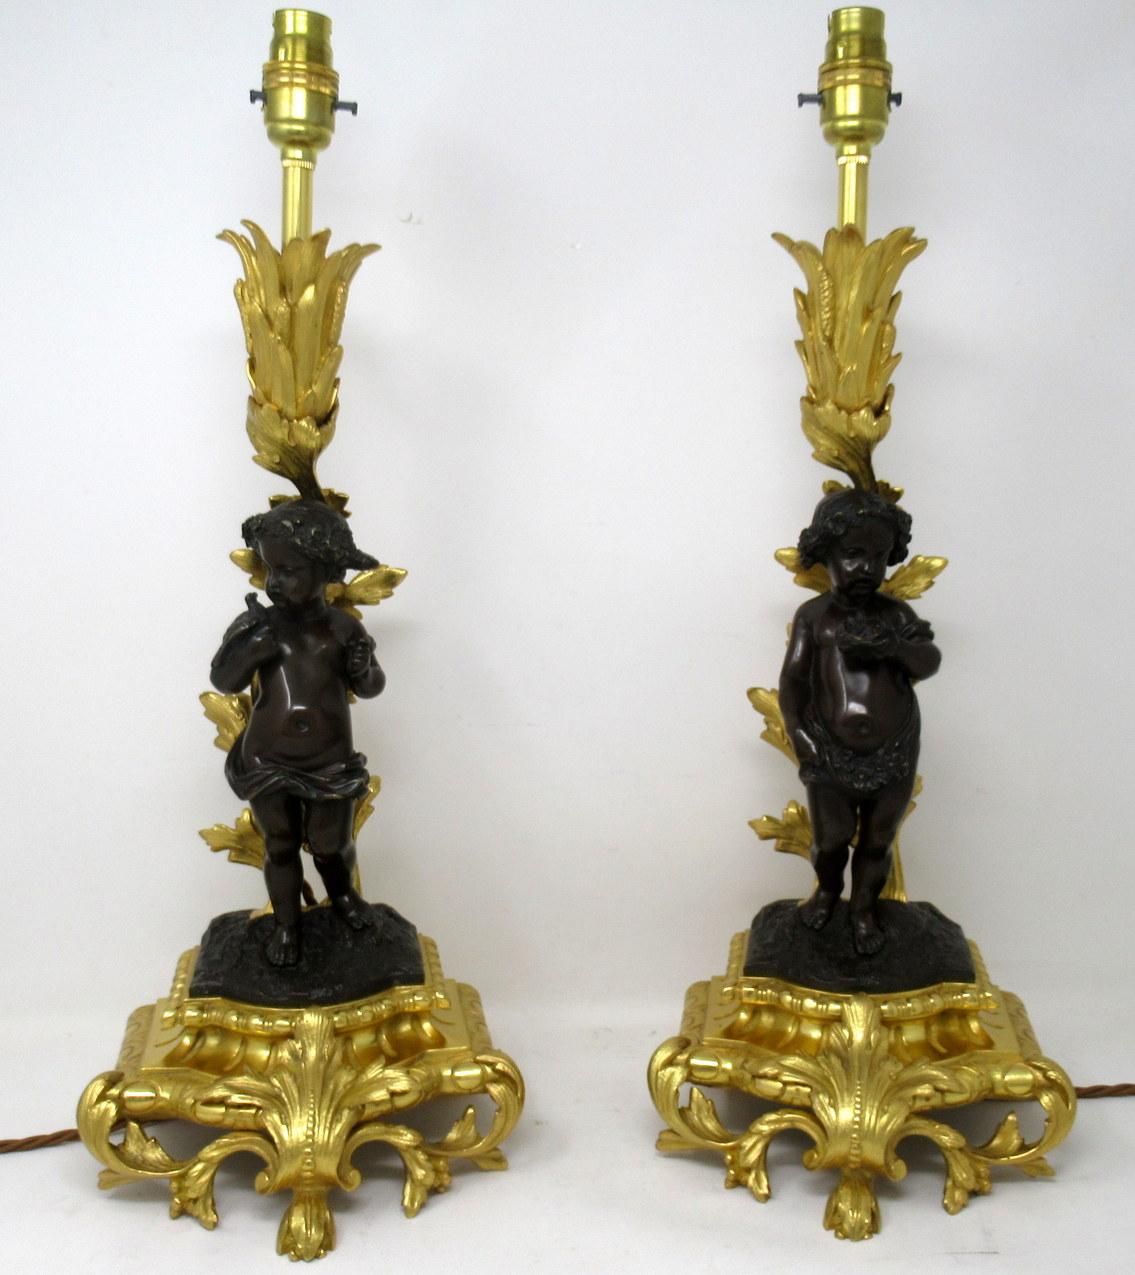 A very fine quality pair of French louis xv inspired patinated and gilt bronze figural candelabra now converted to a pair of electric table Lamps of good size proportions (see last image in-situ) depicting Bacchanal Figures of standing scantily clad